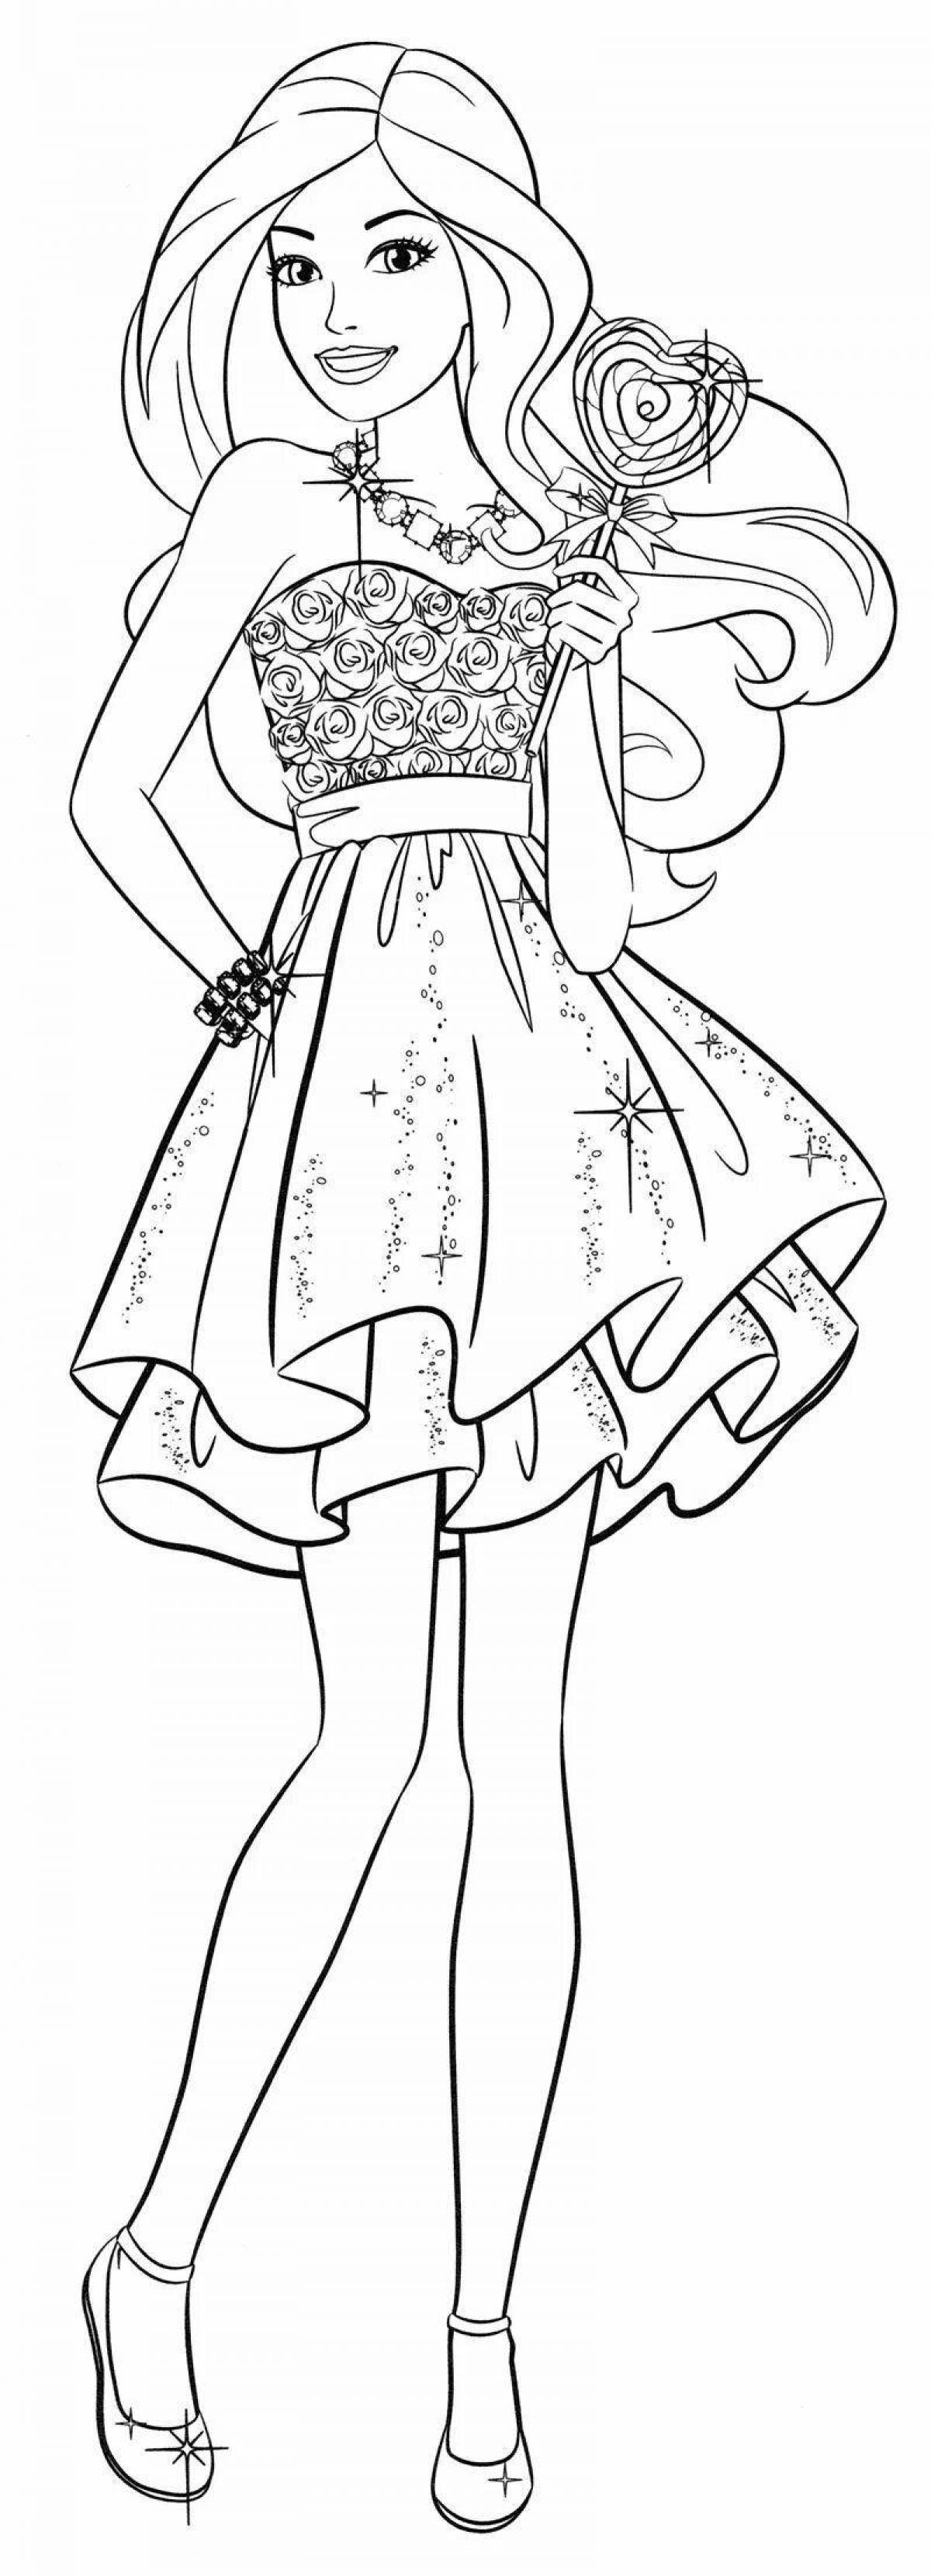 Coloring page tasteful girl in a long dress